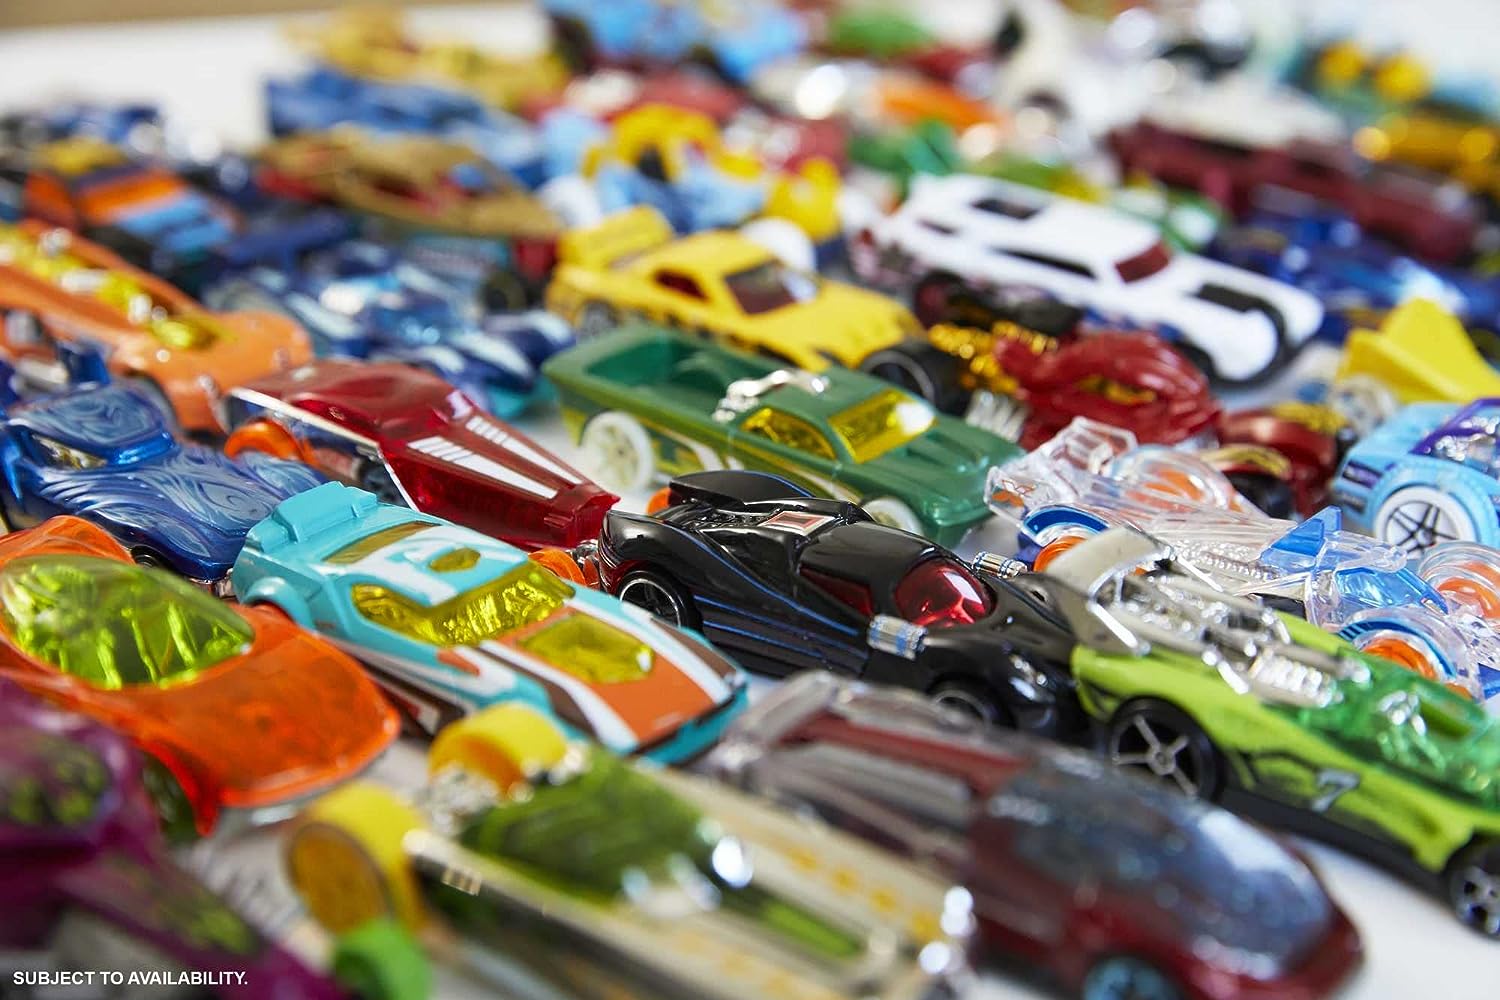 Hot Wheels 20-Car Pack Toy Vehicles For Kids 324-52